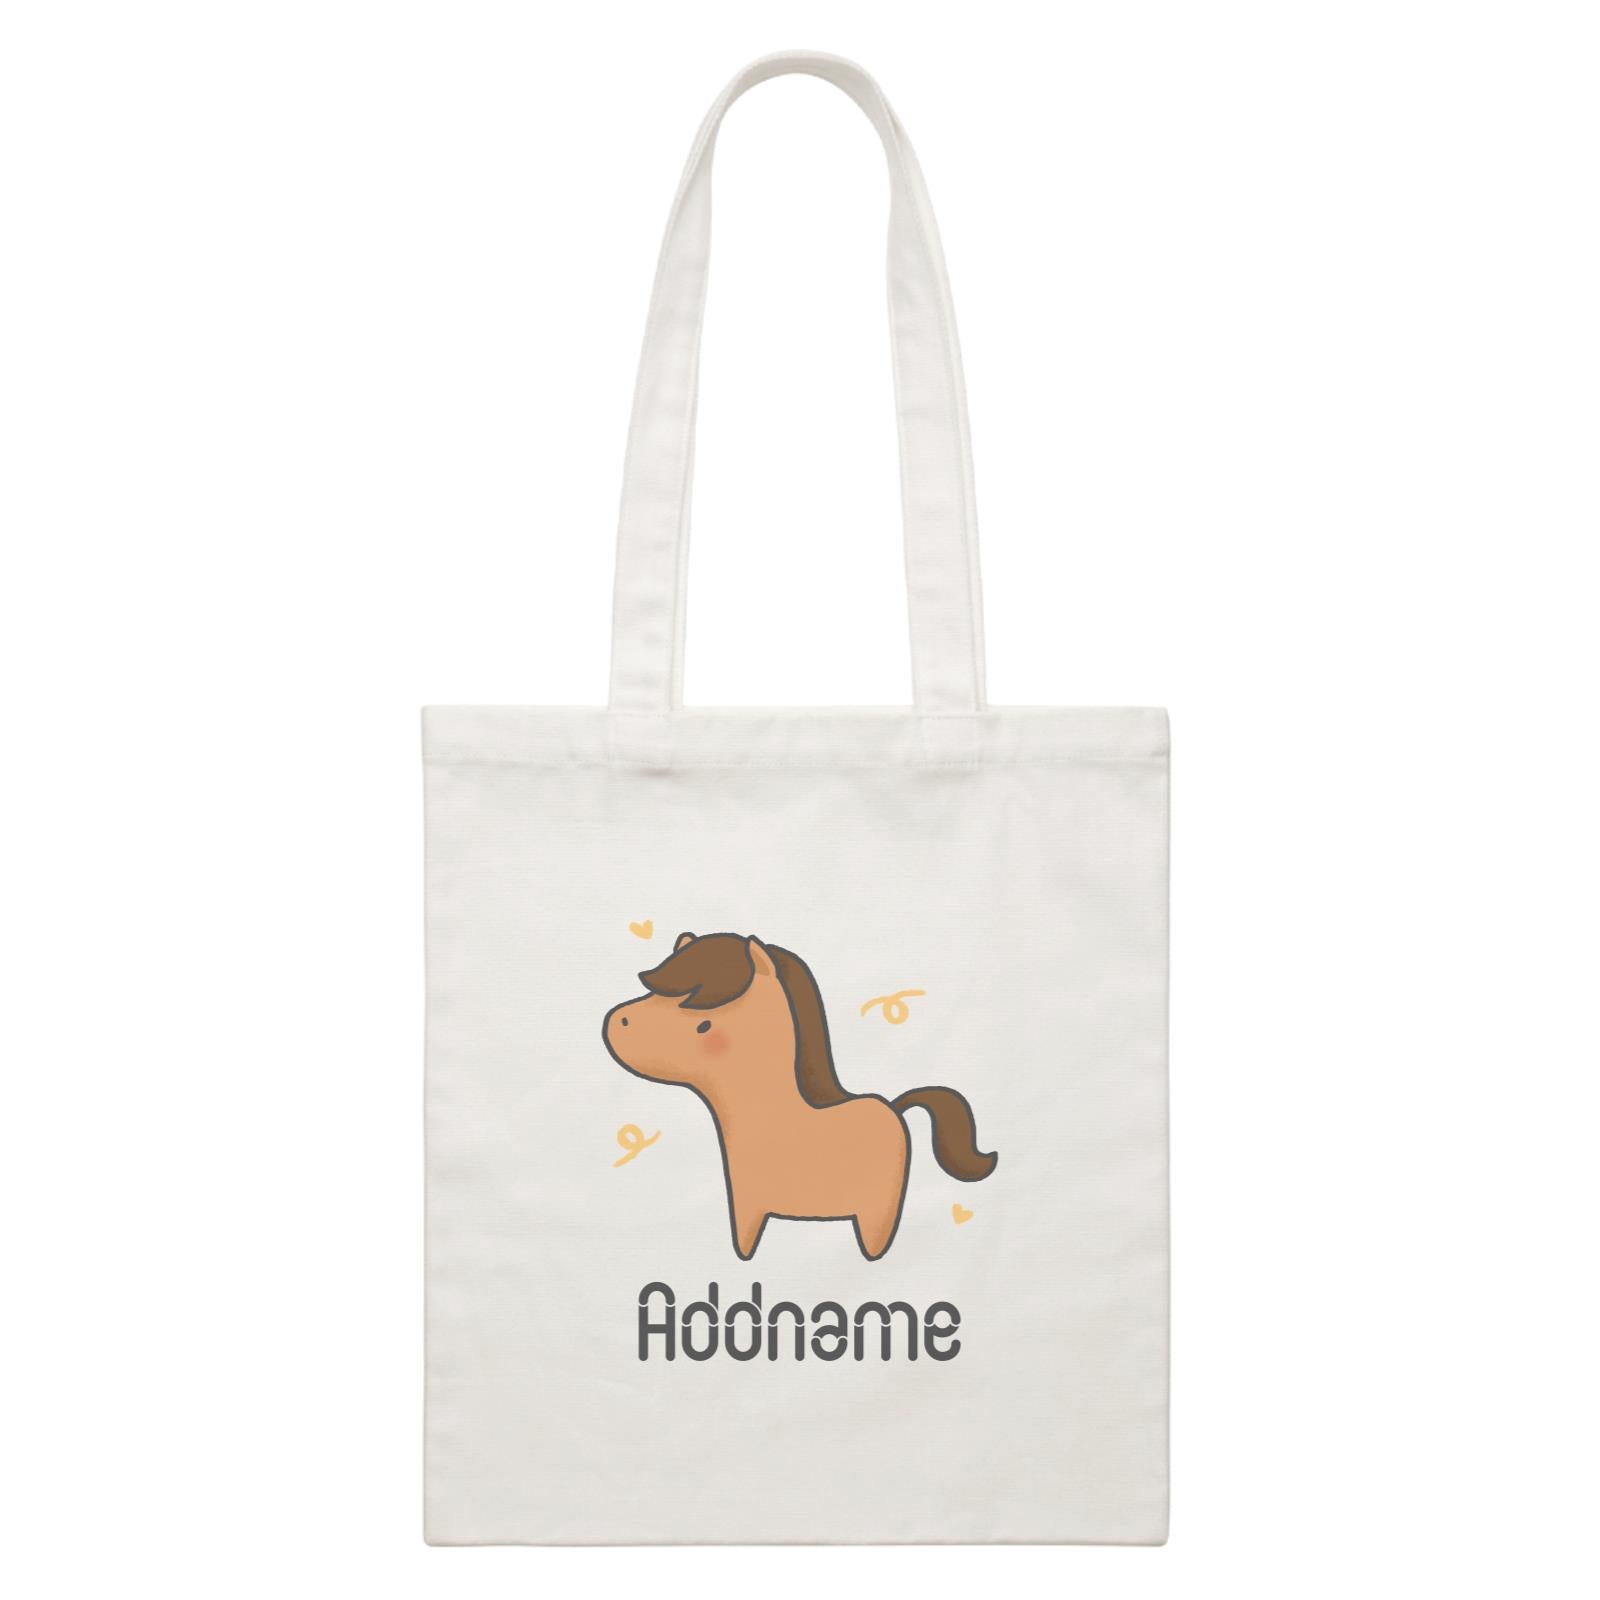 Cute Hand Drawn Style Horse Addname White Canvas Bag